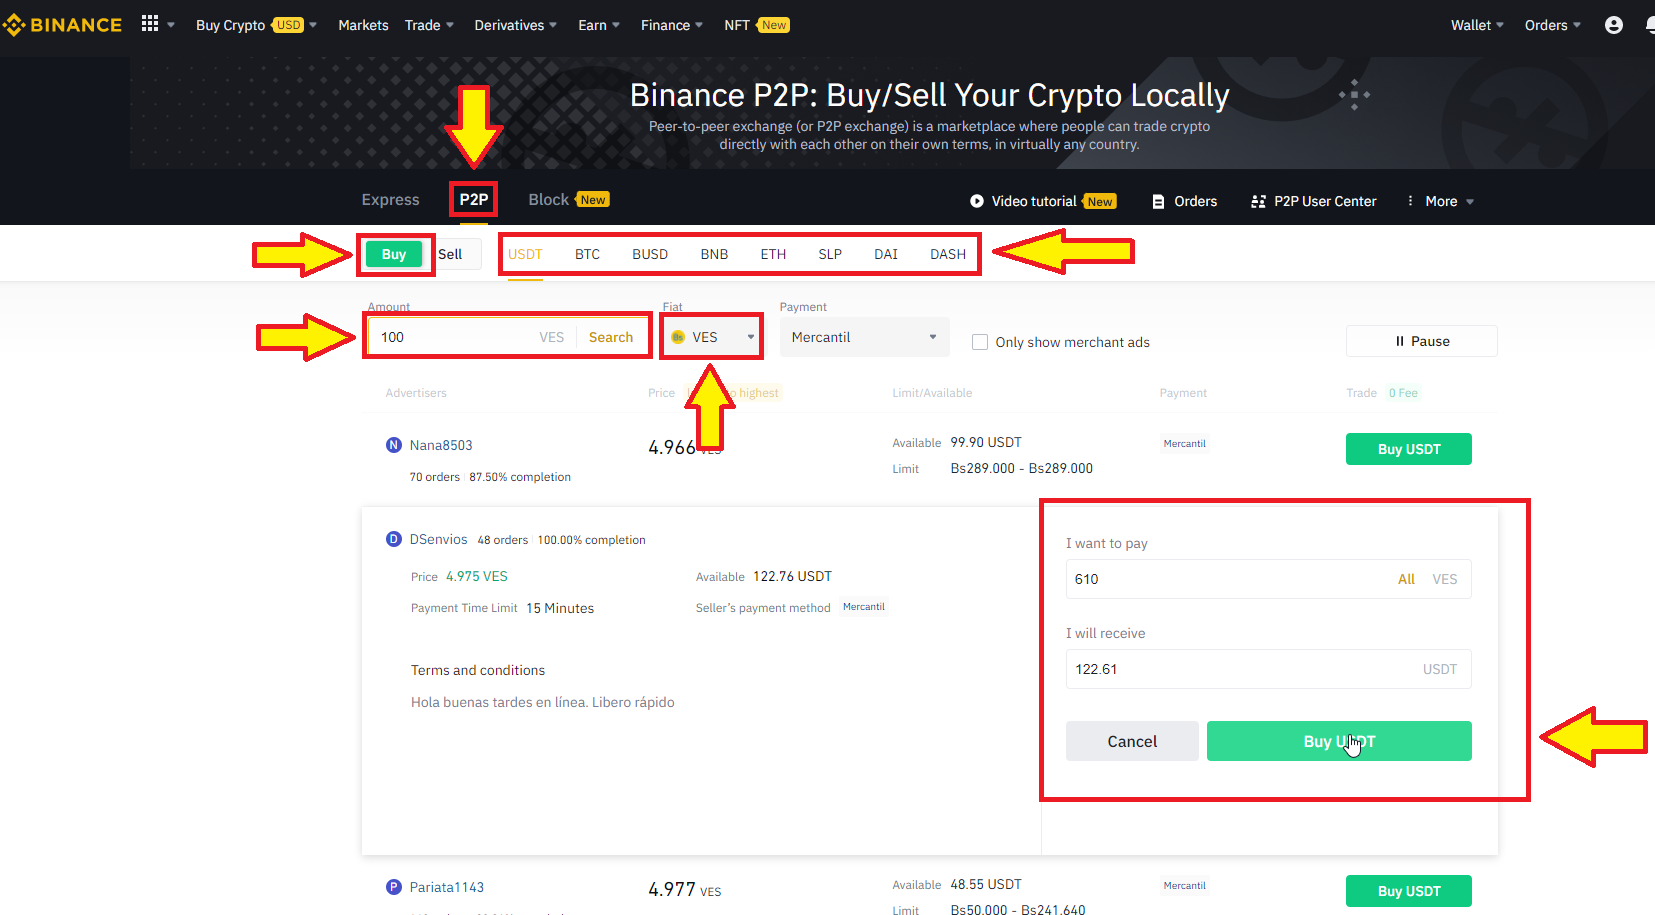 Buy Amp crypto in P2P with a verified account on Binance